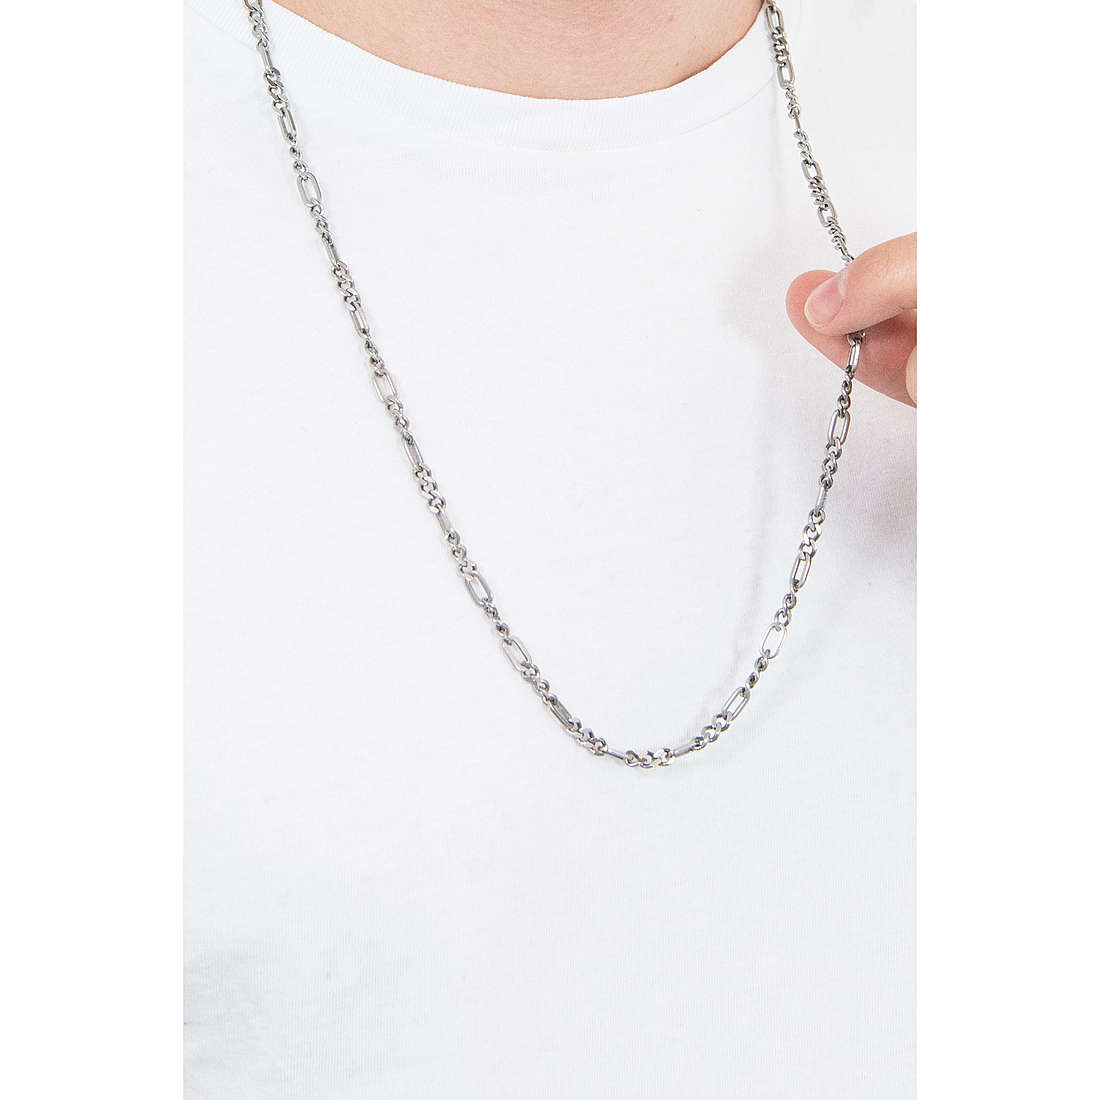 Fossil necklaces Dress man JF03175040 wearing